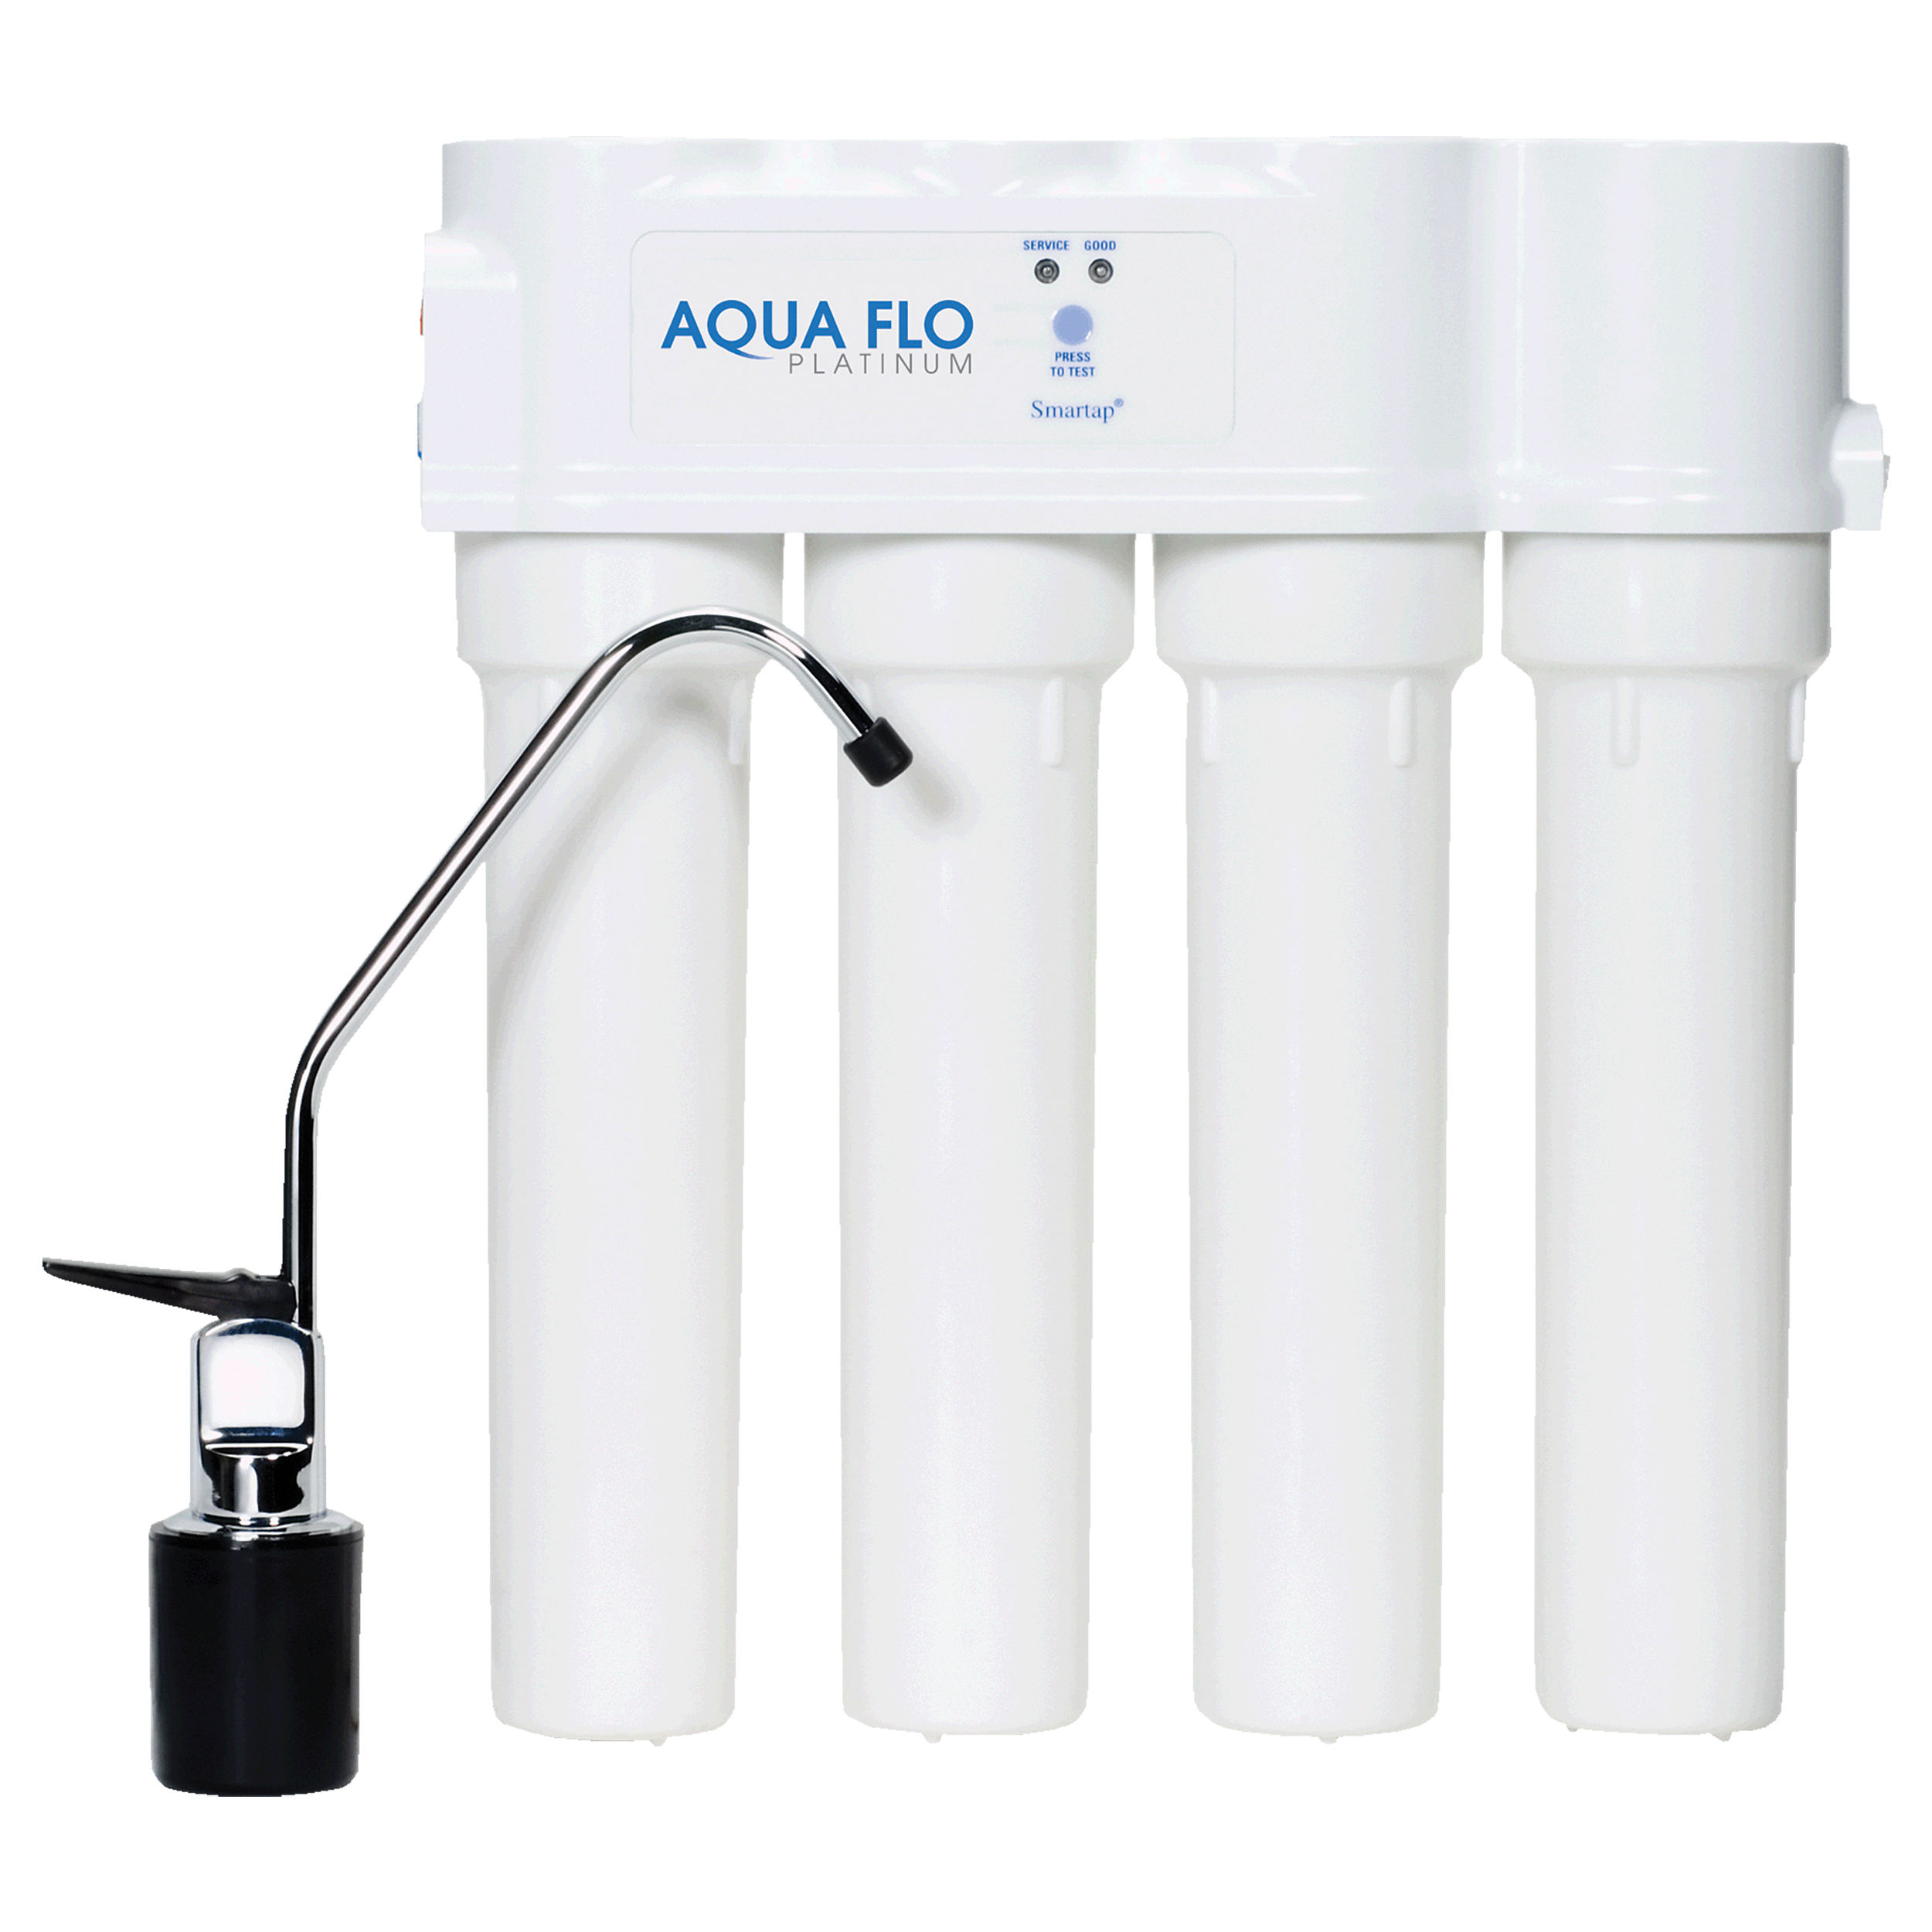 RoPro Reverse Osmosis - 3 Stage System Replacement Filters - Set Of 3  Cartridges